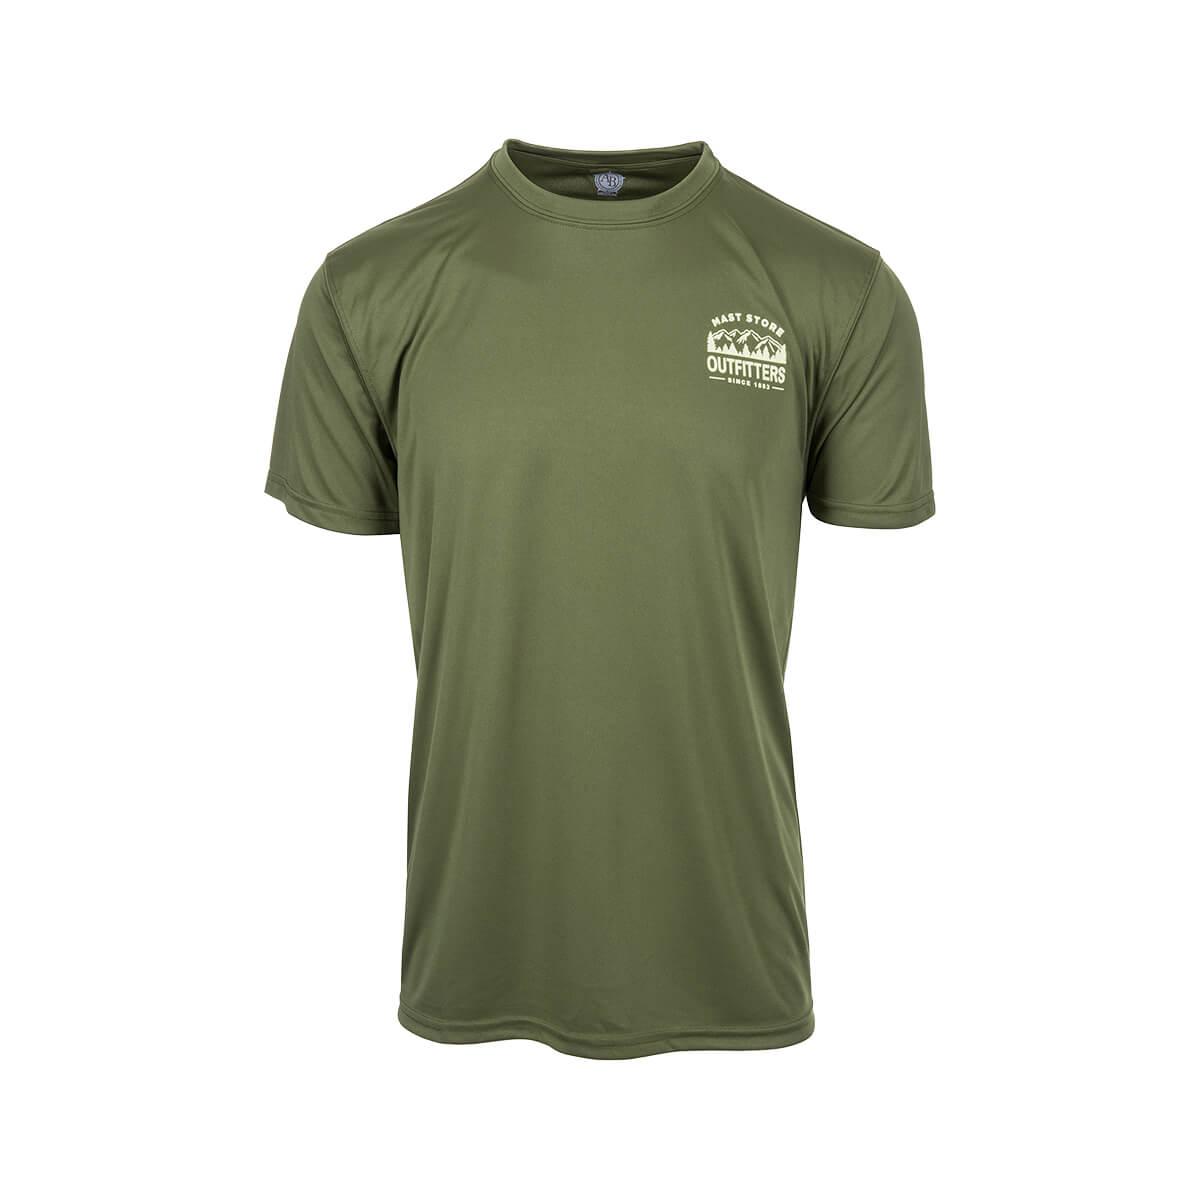  Mast Store Outfitters Solar Short Sleeve Wicking T- Shirt